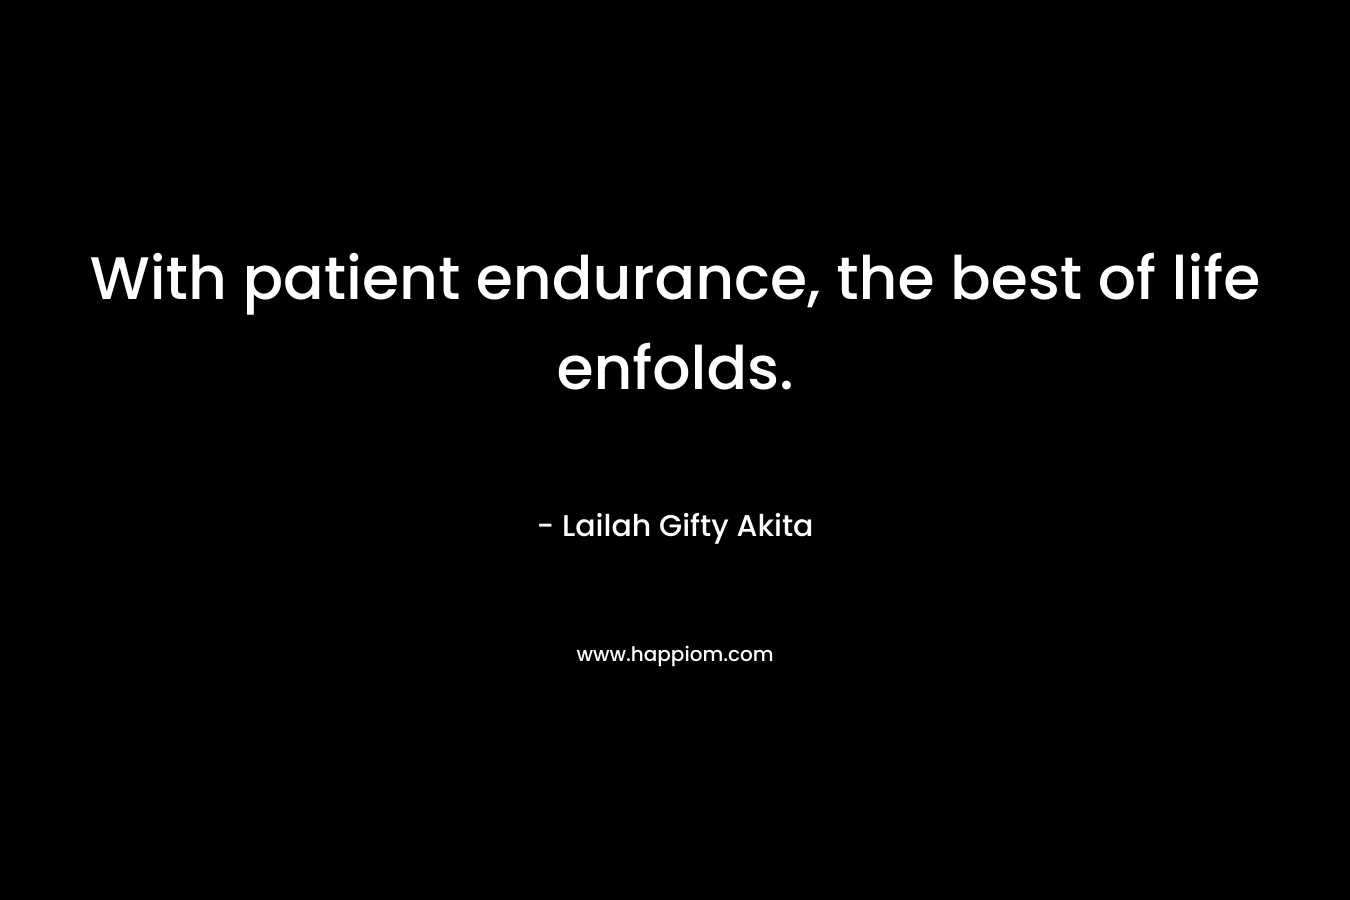 With patient endurance, the best of life enfolds.